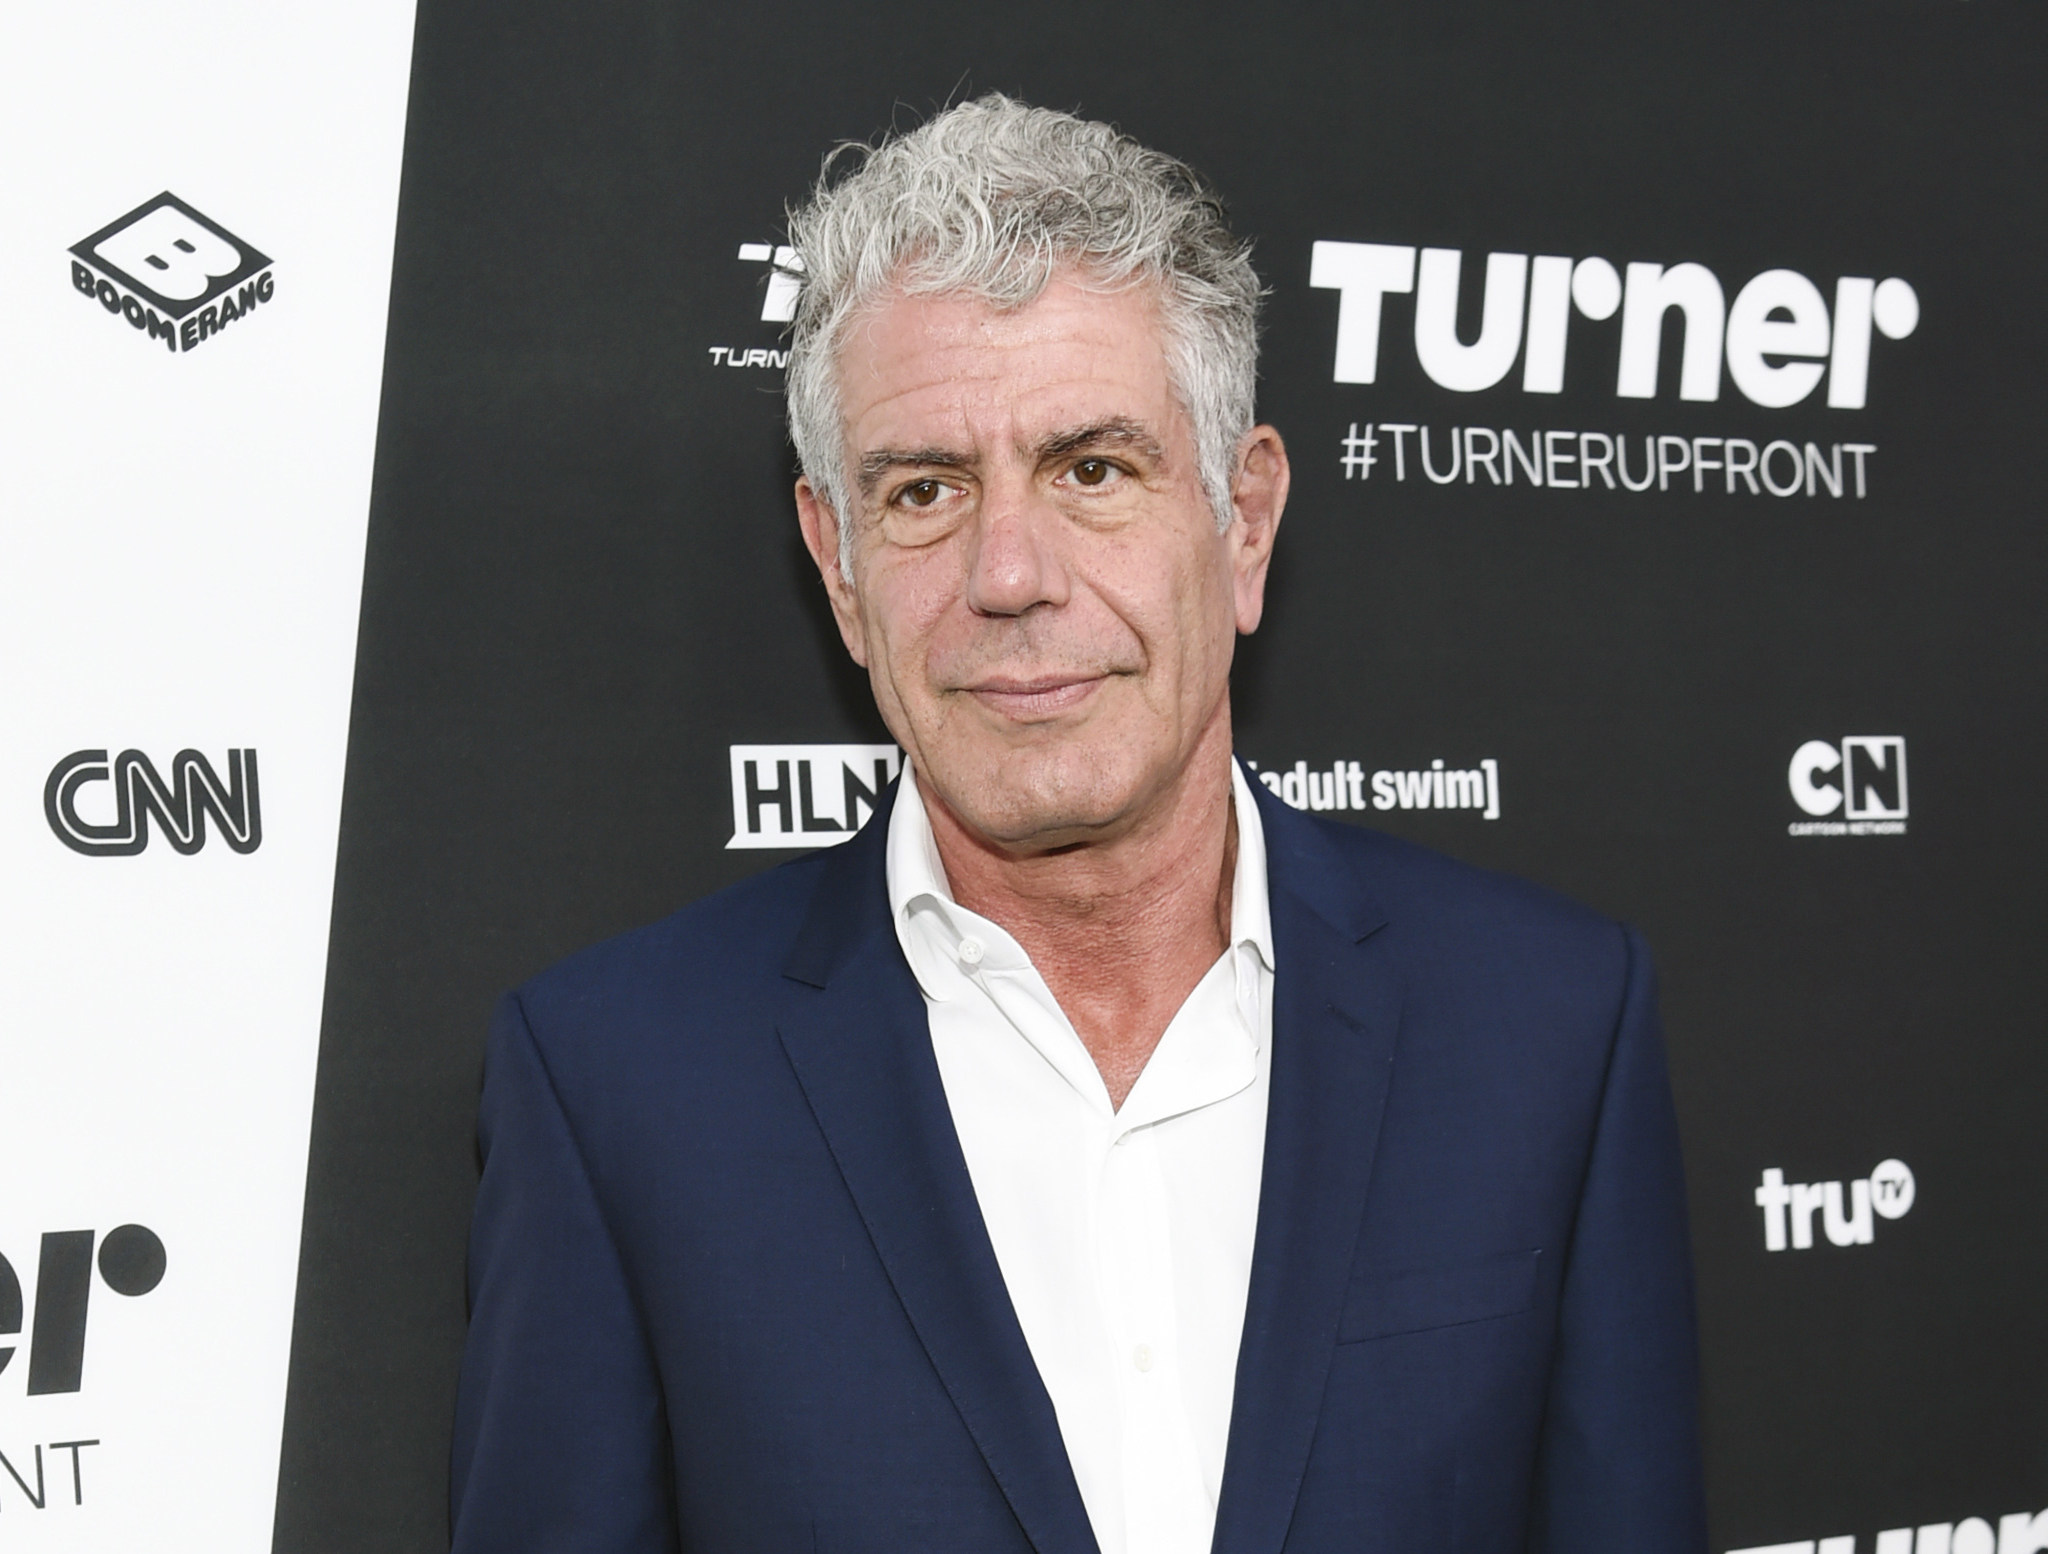 Twitter has added verified checks to dead celebrities’ profiles, including Anthony Bourdain, making them look like paid subscribers. File photo: AP